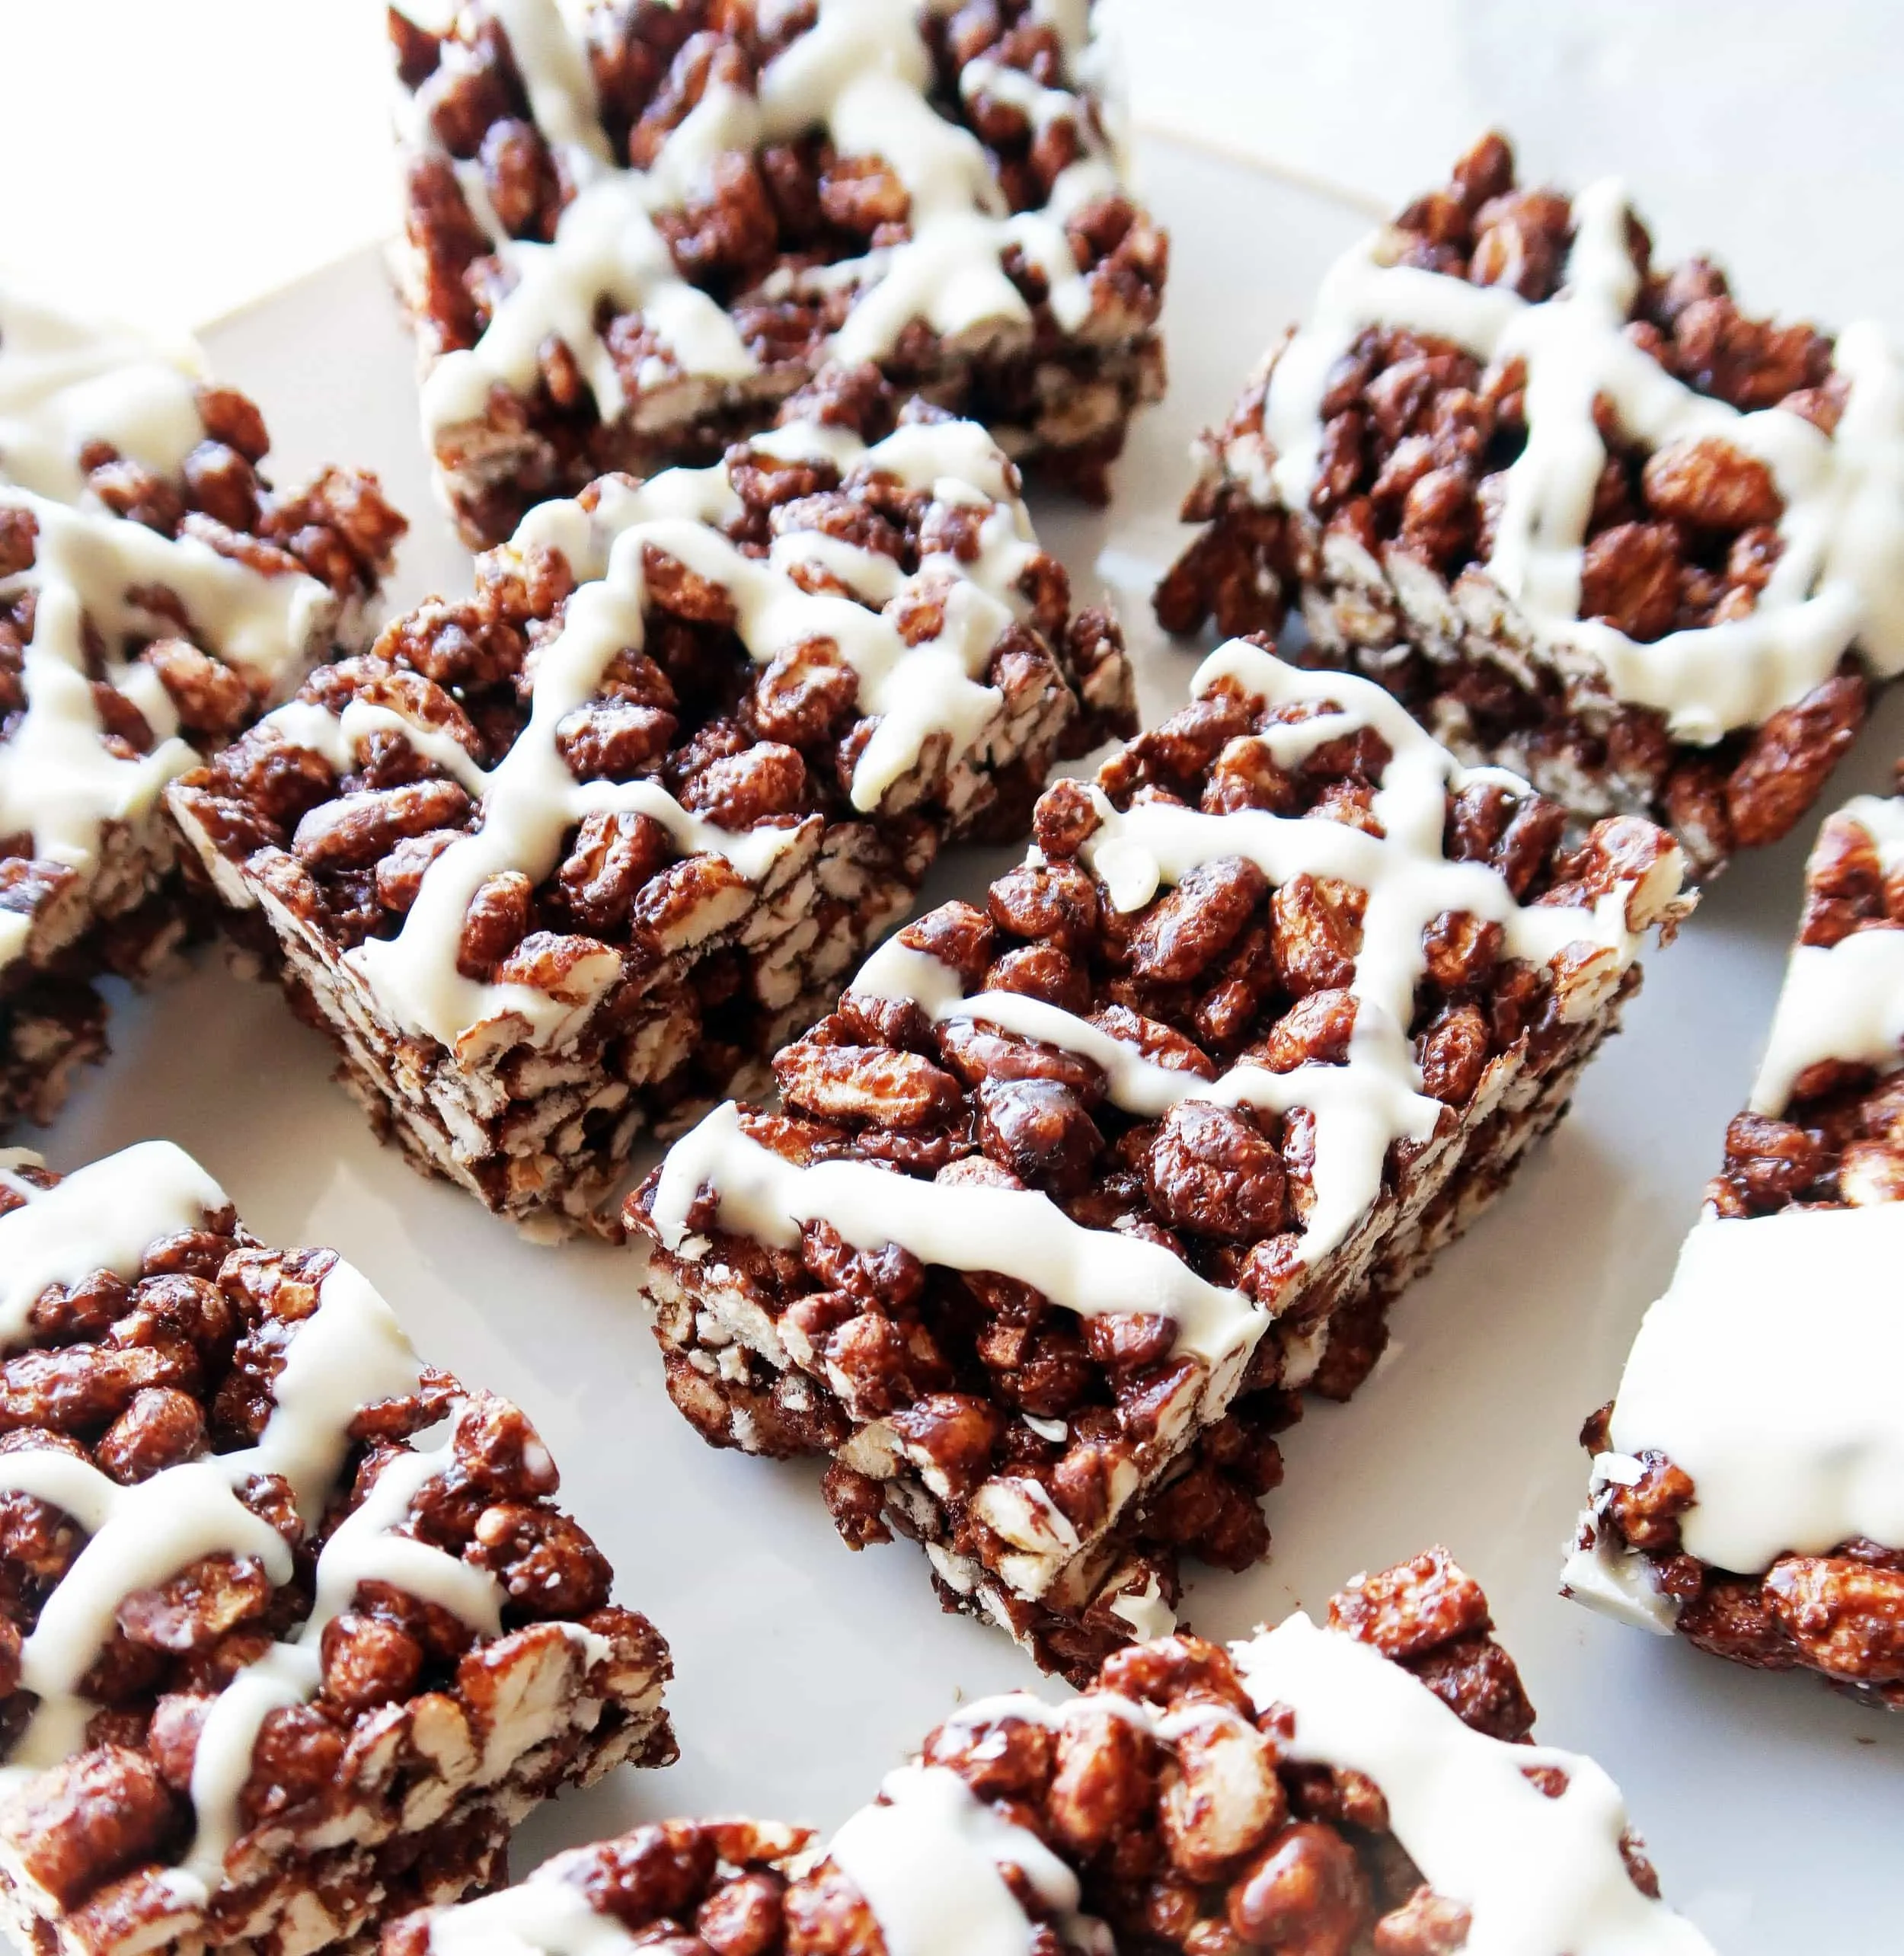 Close up view of Chocolate Marshmallow Puffed Wheat Squares with white chocolate drizzle on a white plate.